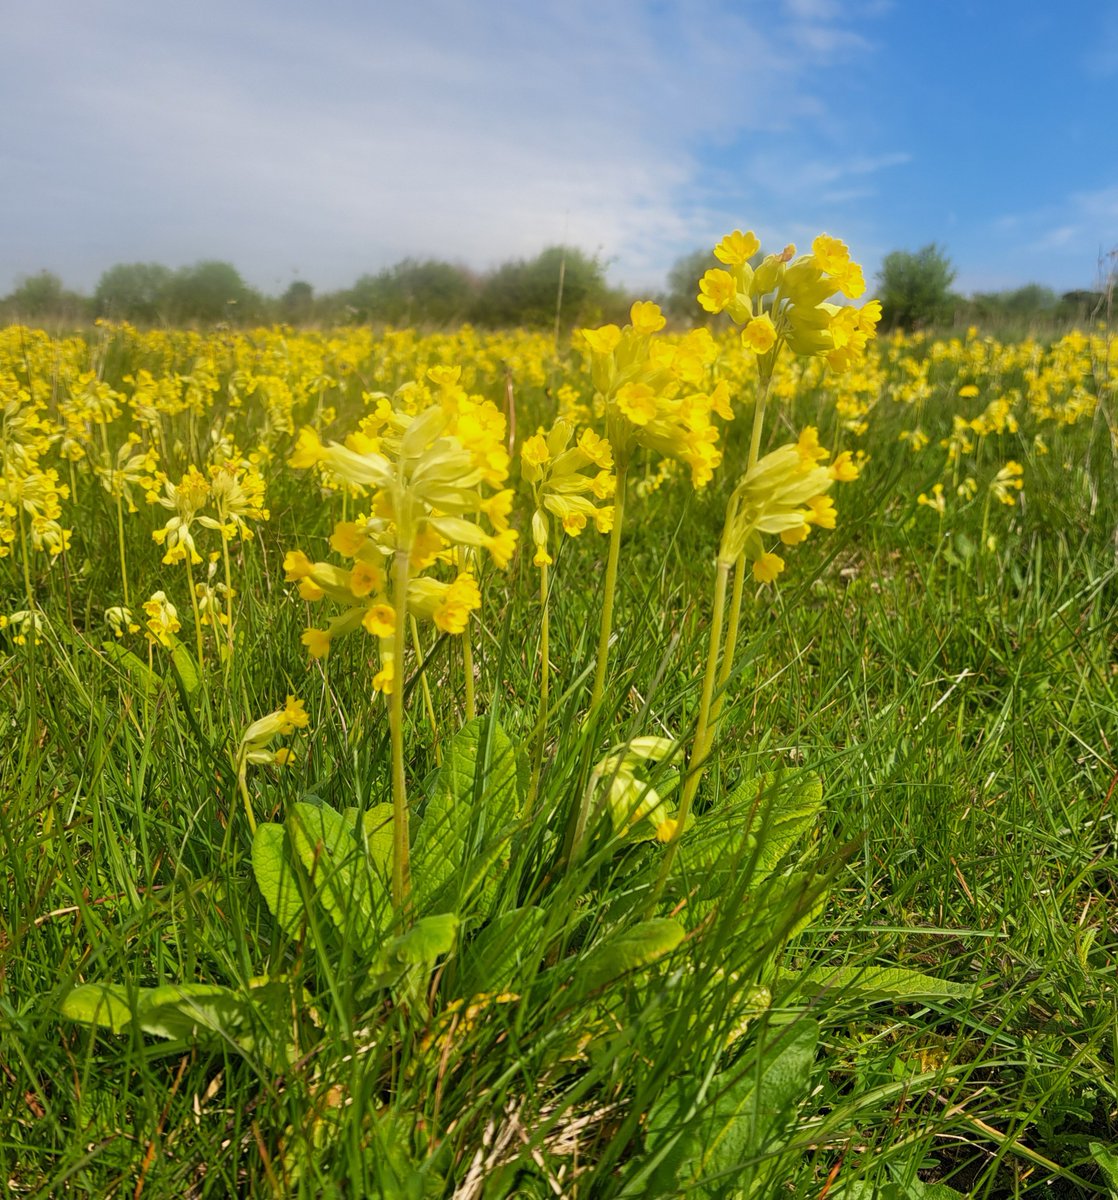 Incredible numbers of Cowslips on Magdalen Hill Down reserve today. @BSBIbotany @savebutterflies #TwitterNat